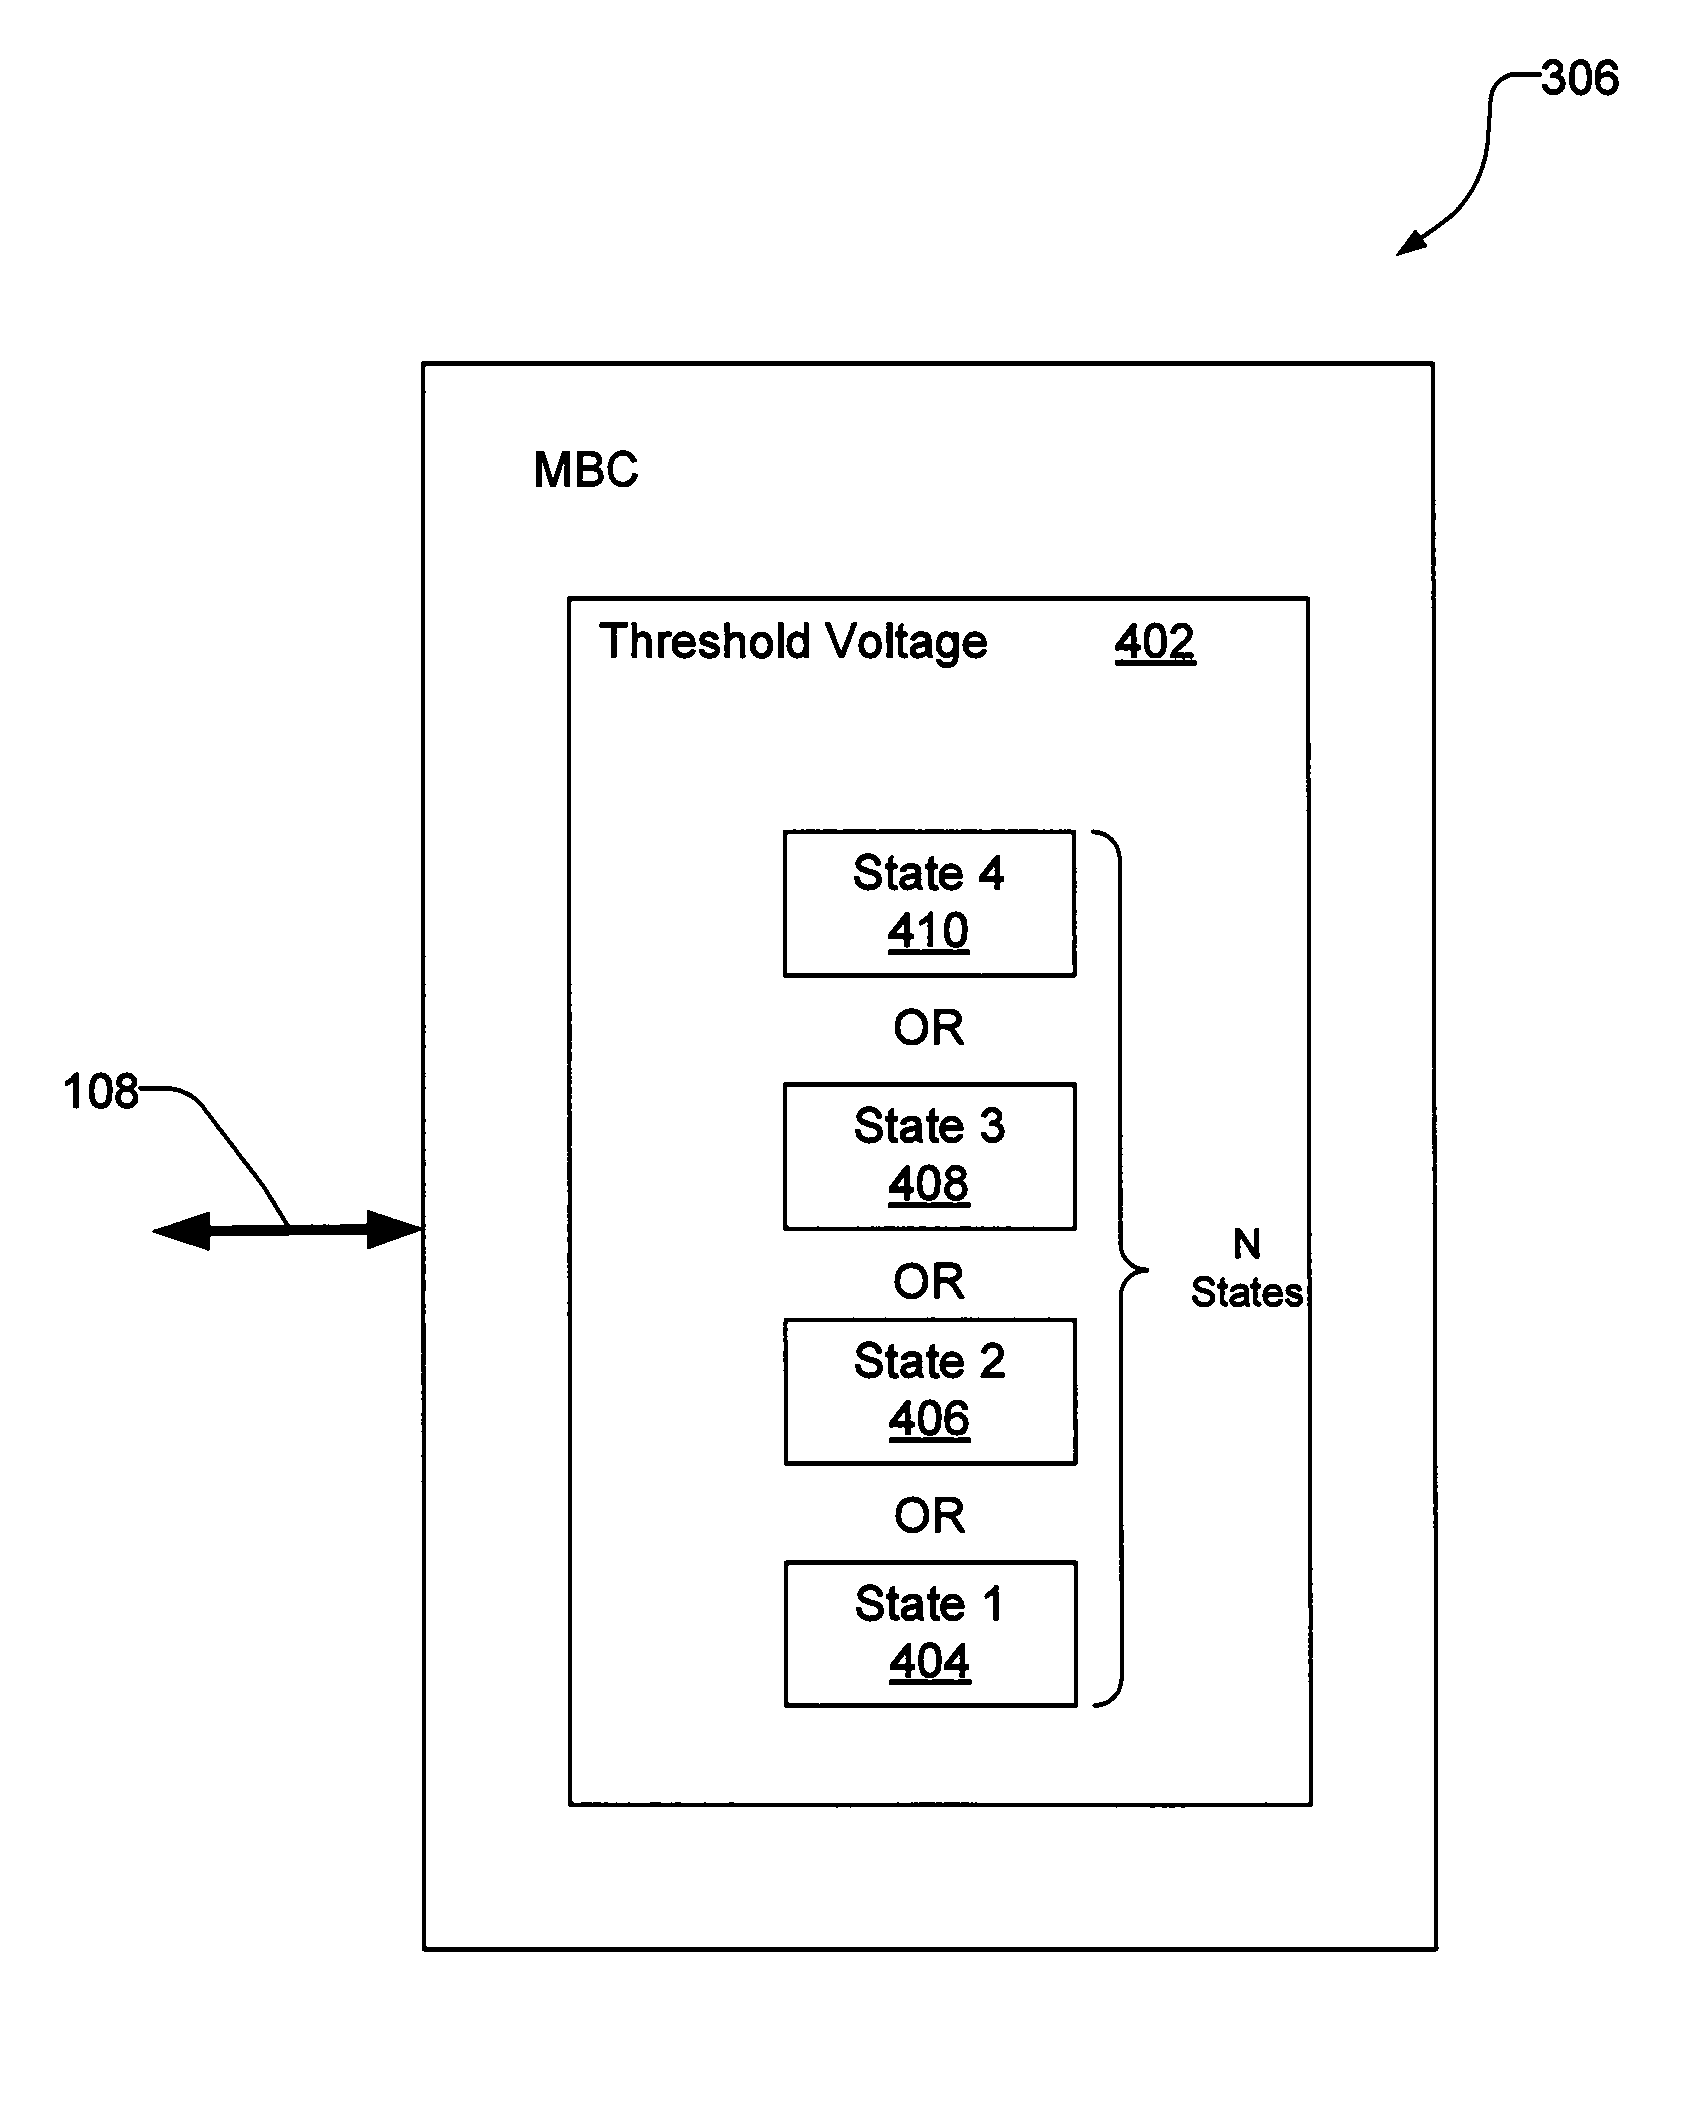 Multiple-bit per cell (MBC) non-volatile memory apparatus and system having polarity control and method of programming same